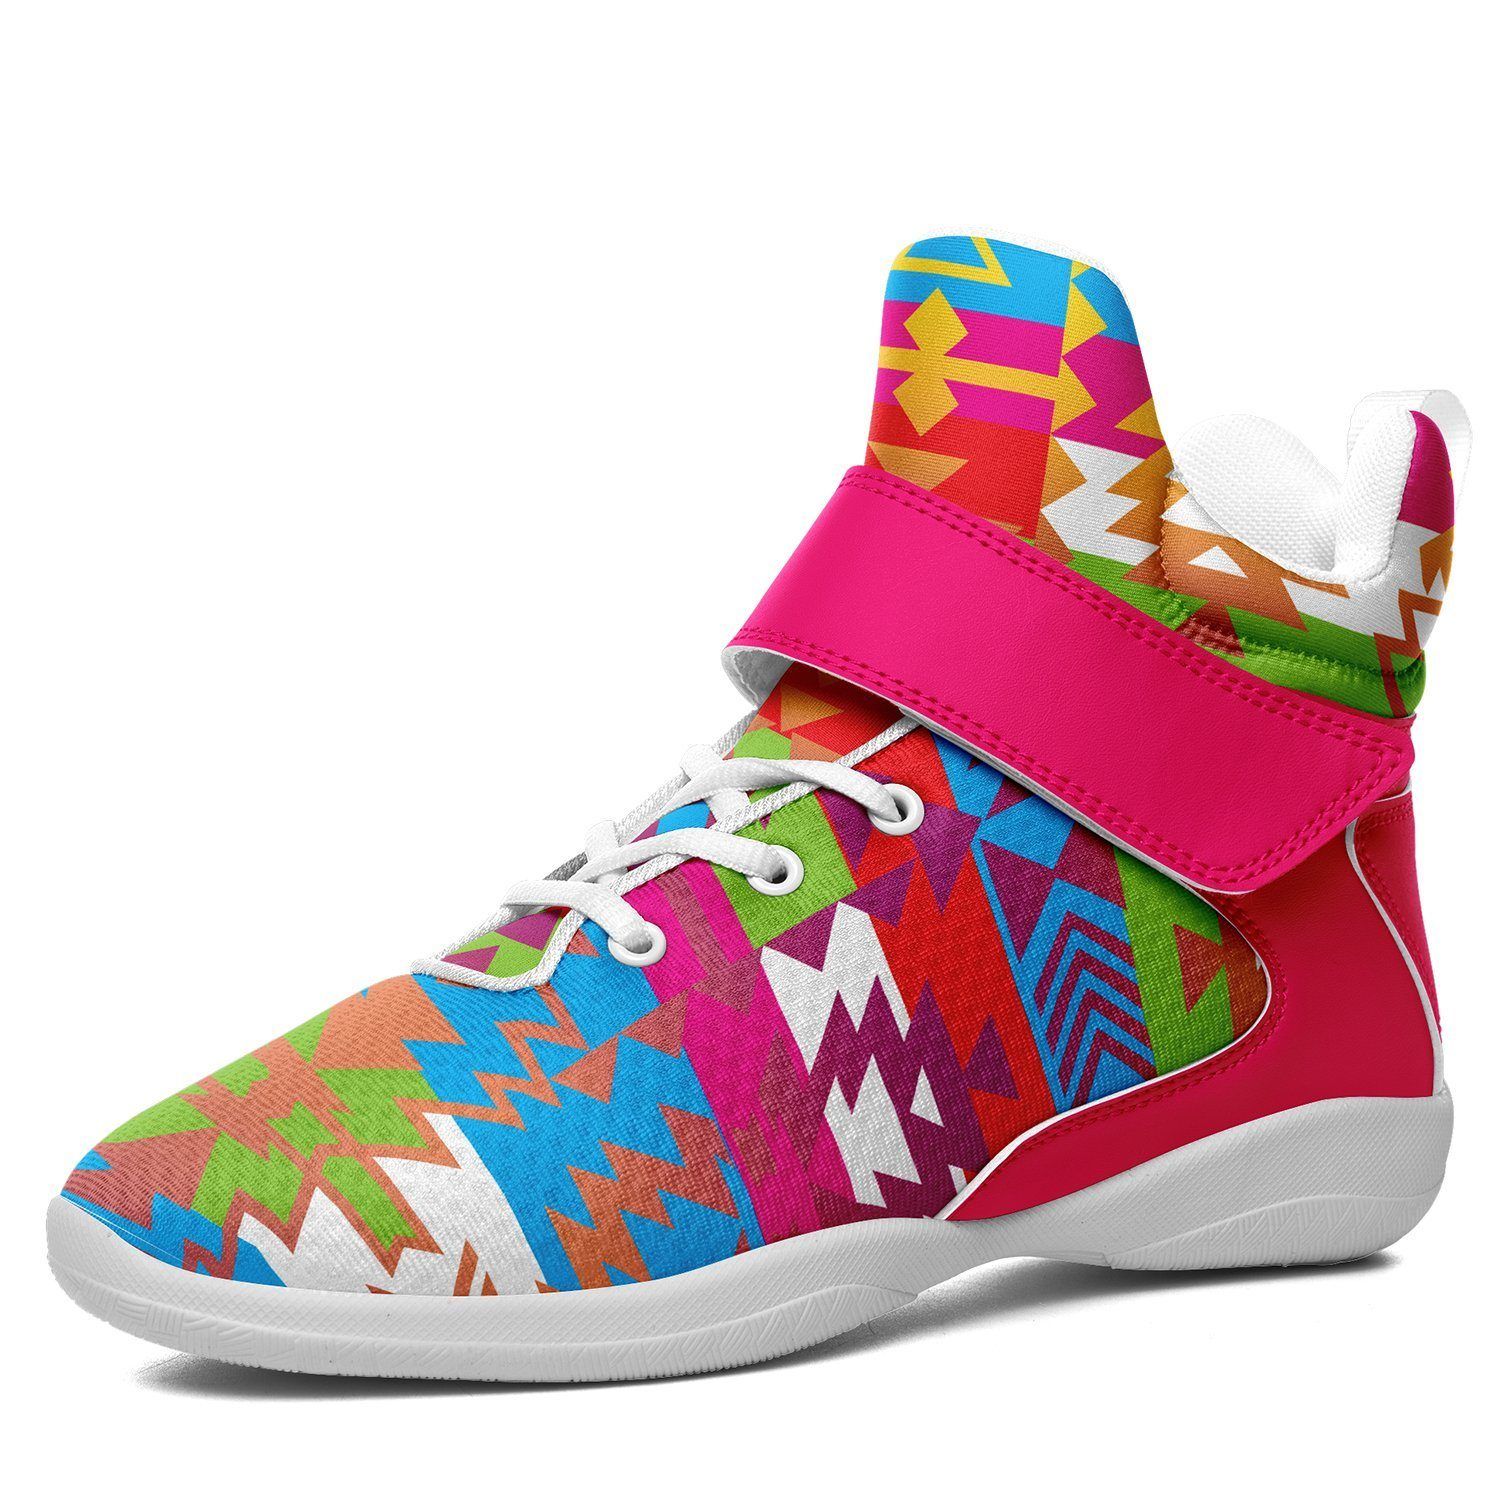 Grand Entry Kid's Ipottaa Basketball / Sport High Top Shoes 49 Dzine US Child 12.5 / EUR 30 White Sole with Pink Strap 